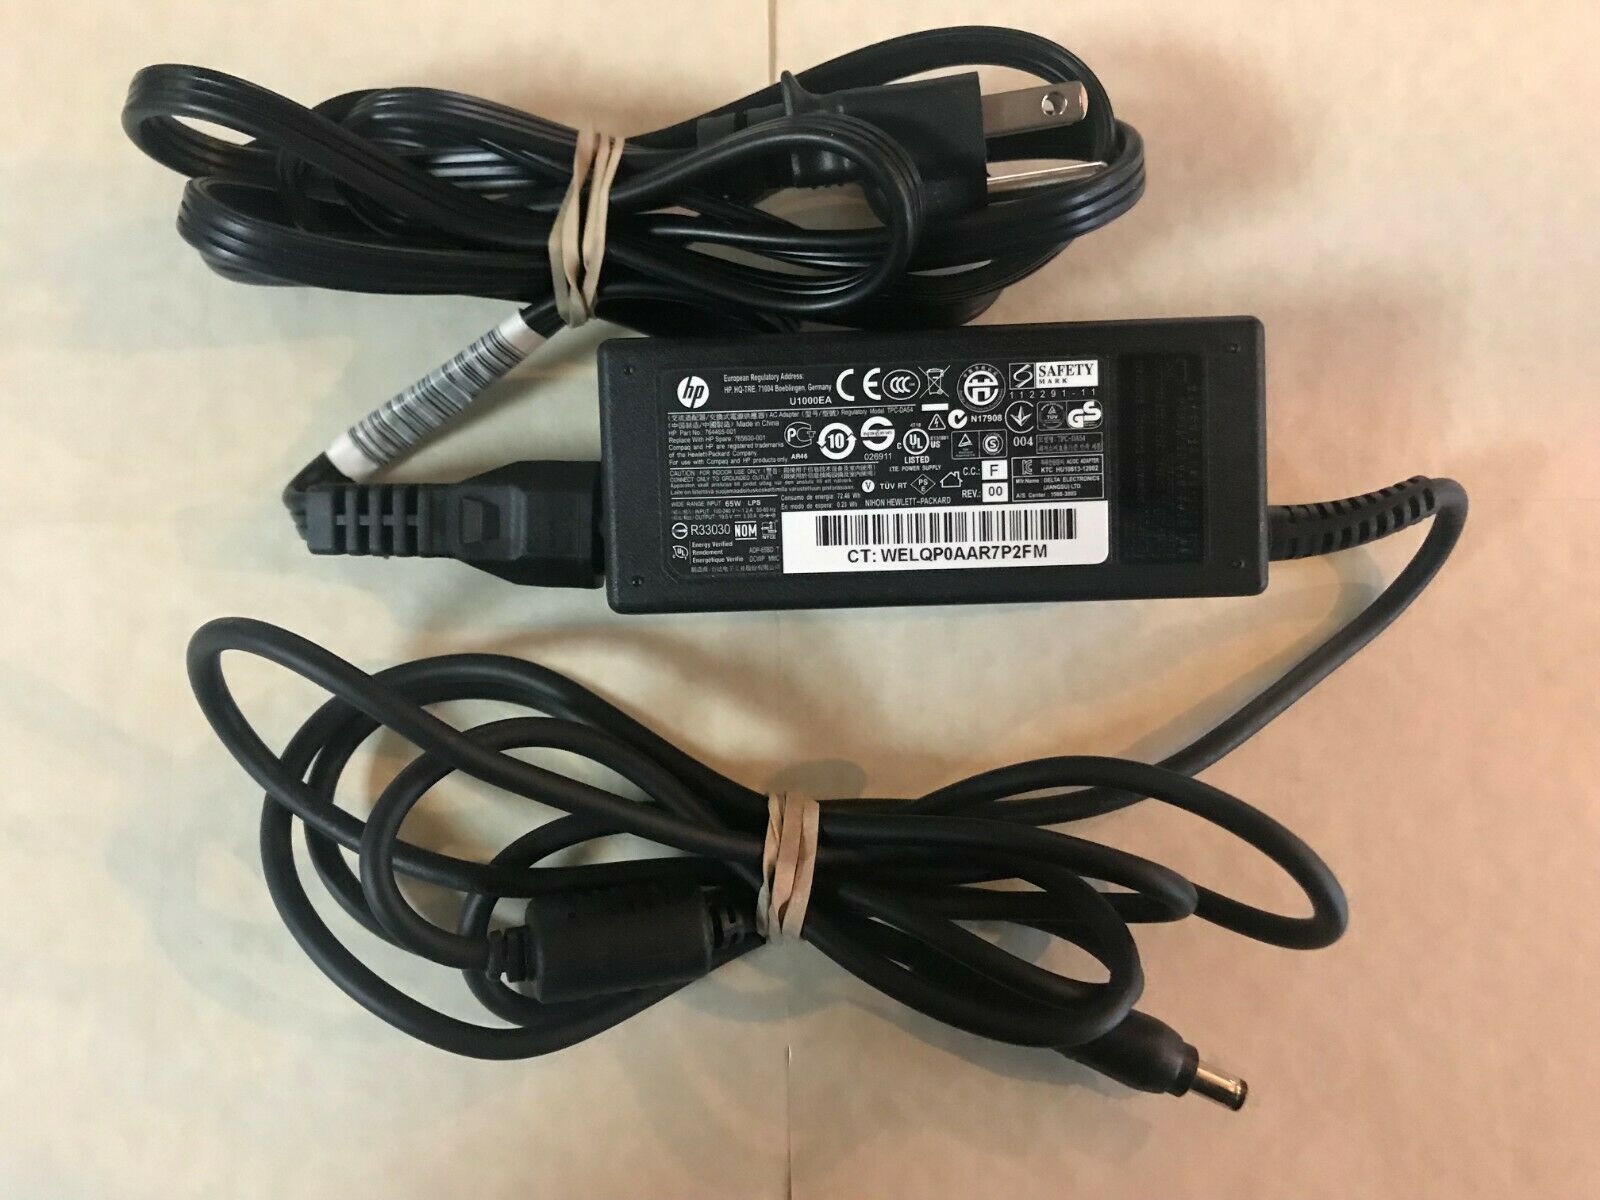 Genuine HP 65W AC Adapter for HP T310 AiO Tera 2 Zero Client,765600-001 , tested working. Original Genuine HP 65W AC - Click Image to Close